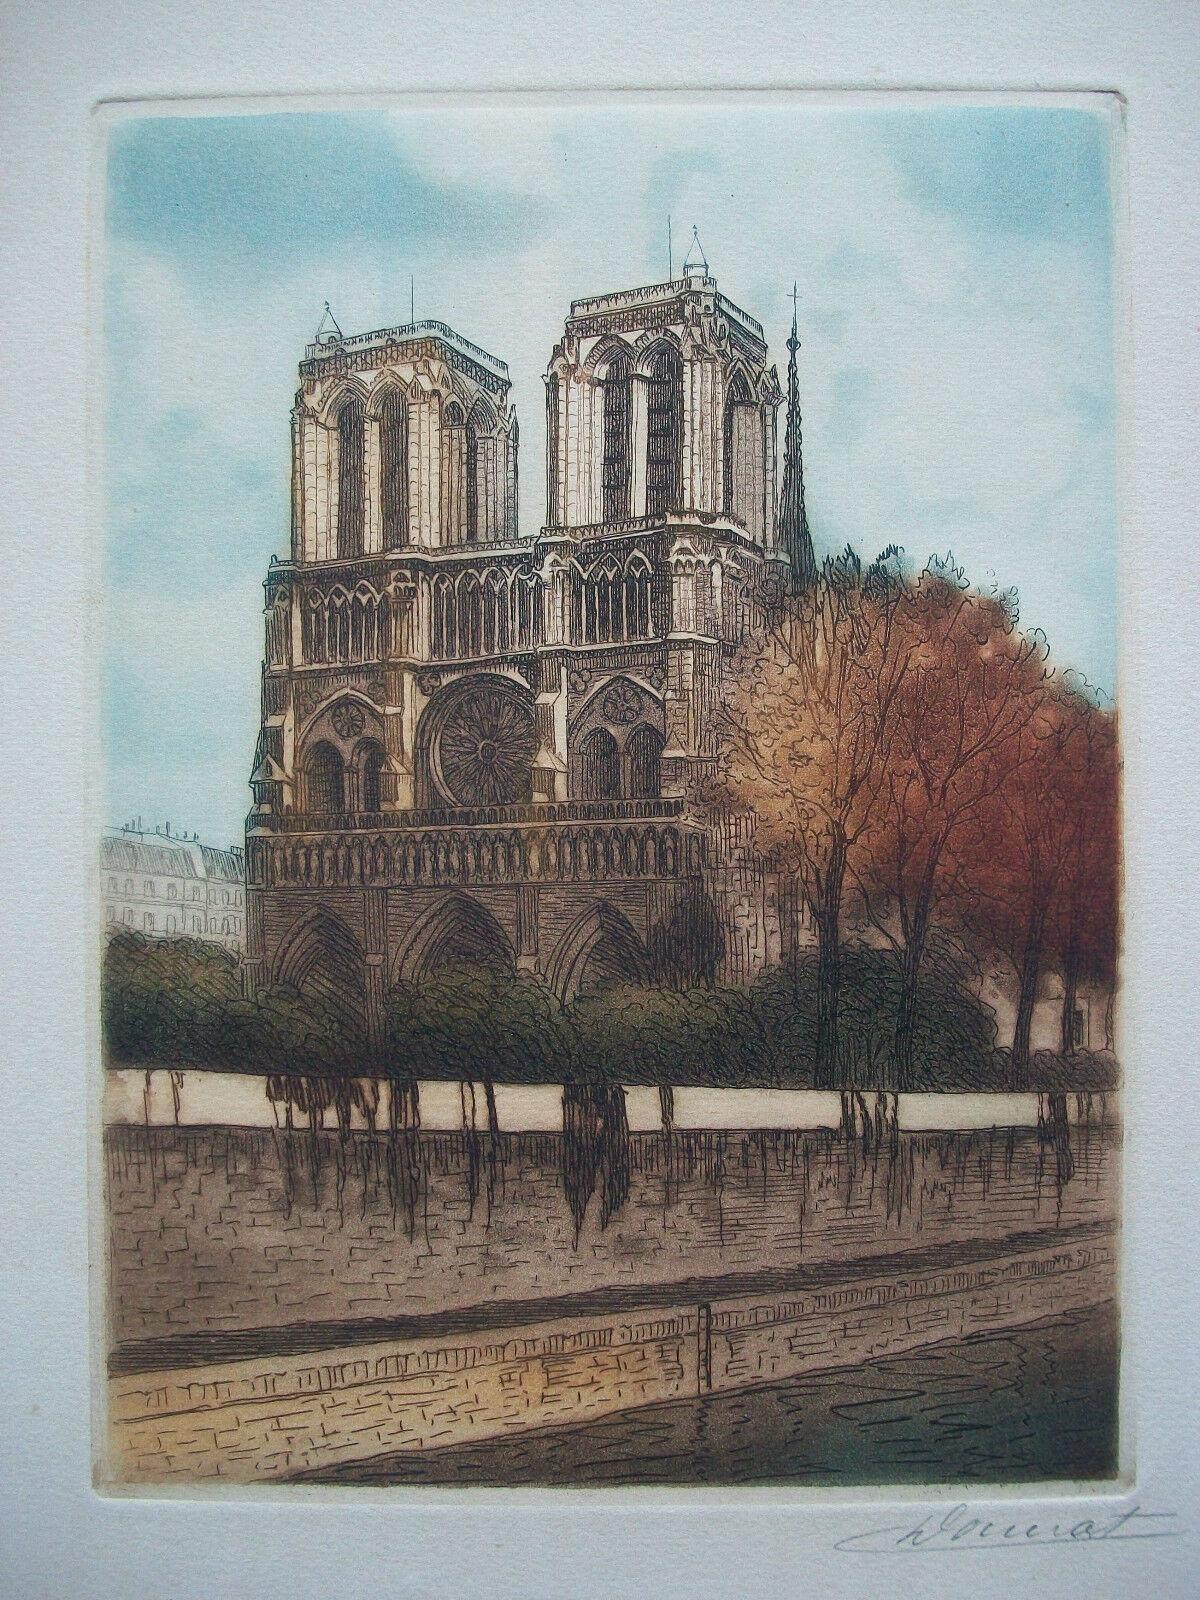 DOURAT - 'Notre-Dame No. 1' - Antique fine art colored sepia tone engraving on heavy cream paper - Notre Dame Cathedral in Paris - signed and titled - France - circa 1910.

Excellent antique condition - minor foxing - no loss - no damage - no